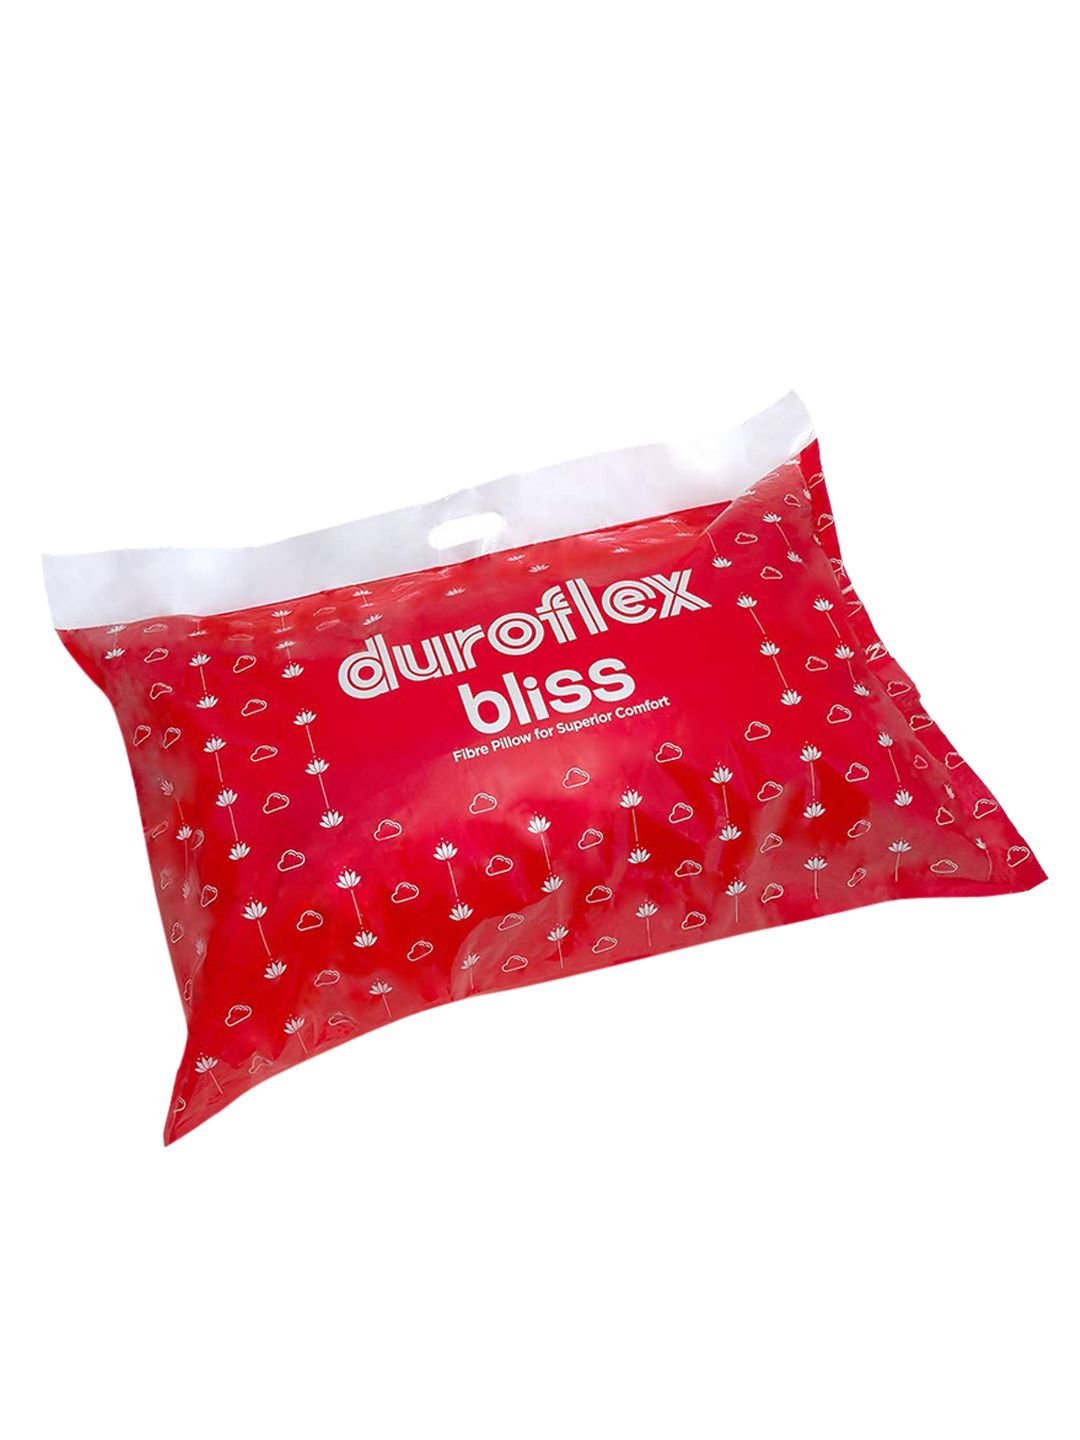 Duroflex Red Bliss - Lightweight High Quality Fibre Pillow With Breathable Fabric Price in India